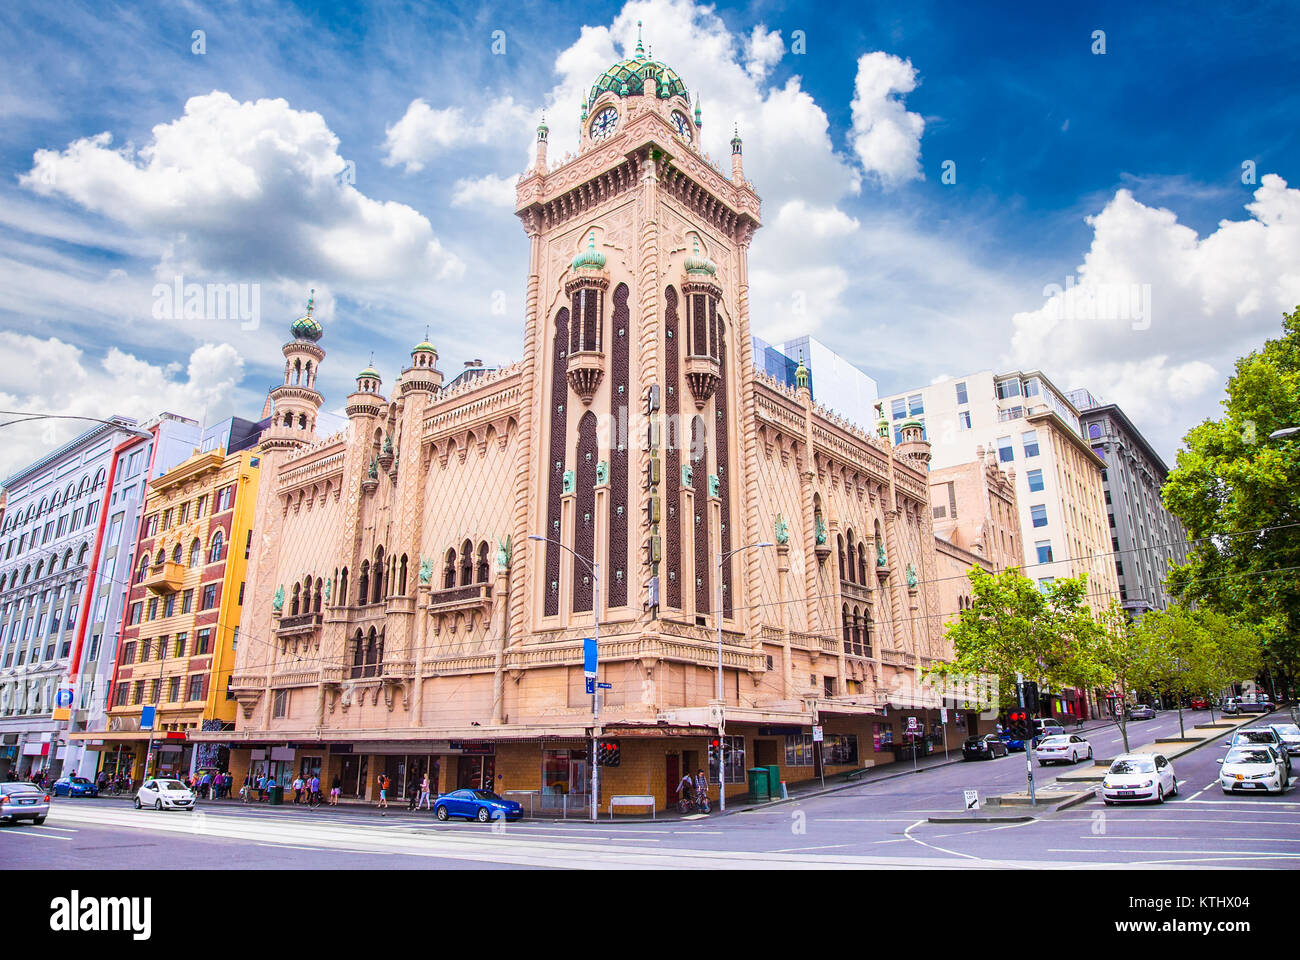 MELBOURNE, AUSTRALIA-JAN 15, 2015:Forum Theatre is a famous landmark of Melbourne on Jan 15, 2015, with Moorish Revival style exterior. It can be foun Stock Photo